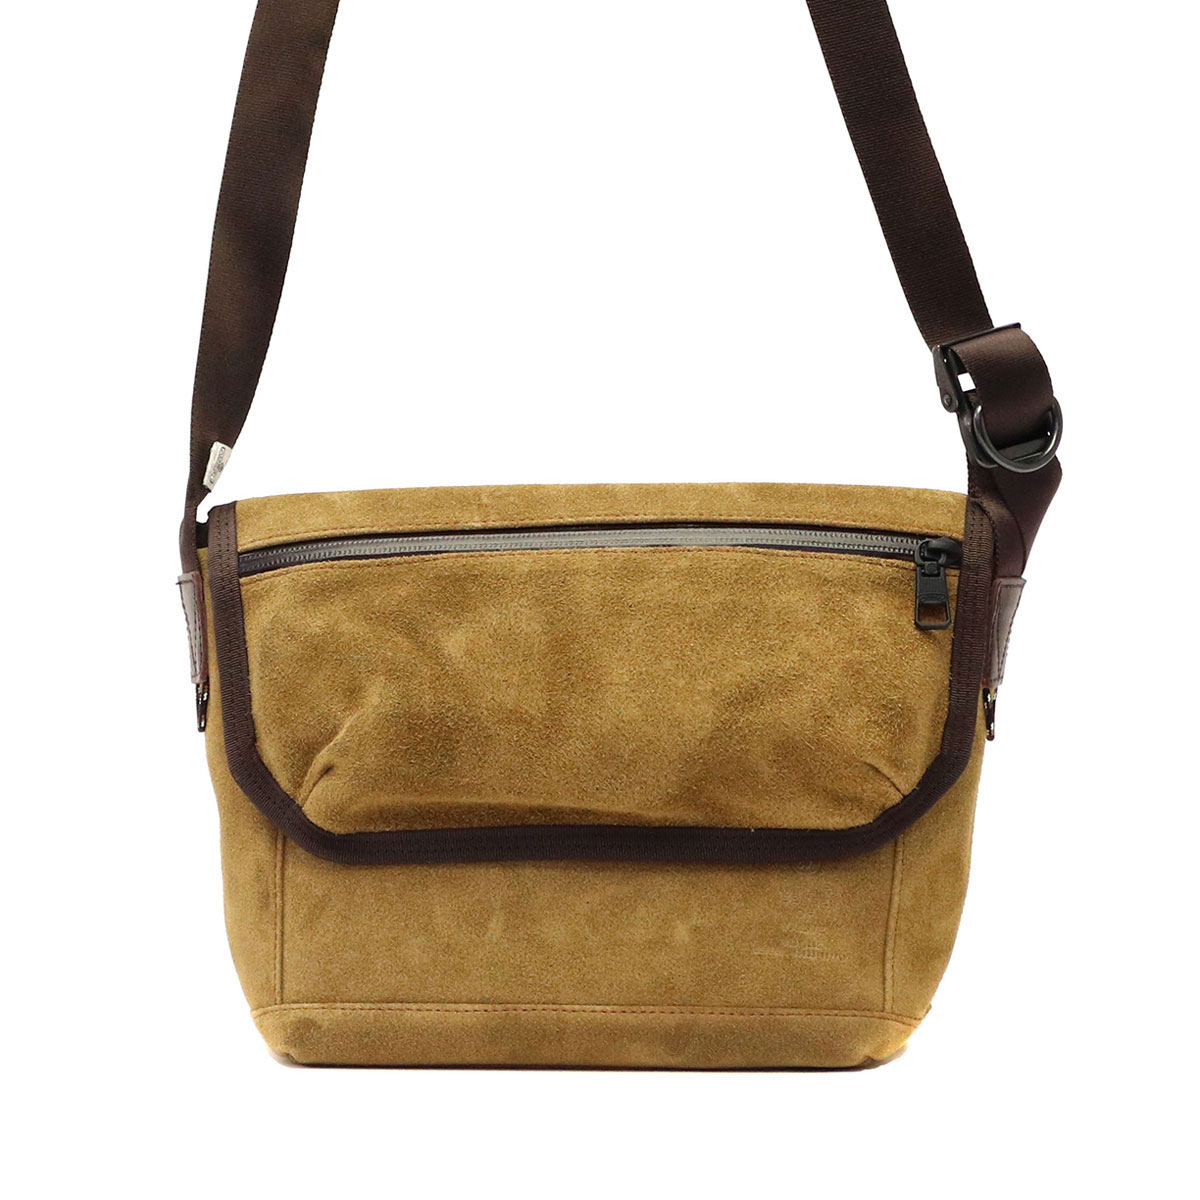 AS2OV アッソブ WATER PROOF SUEDE MESSENGER BAG 091755｜【正規販売